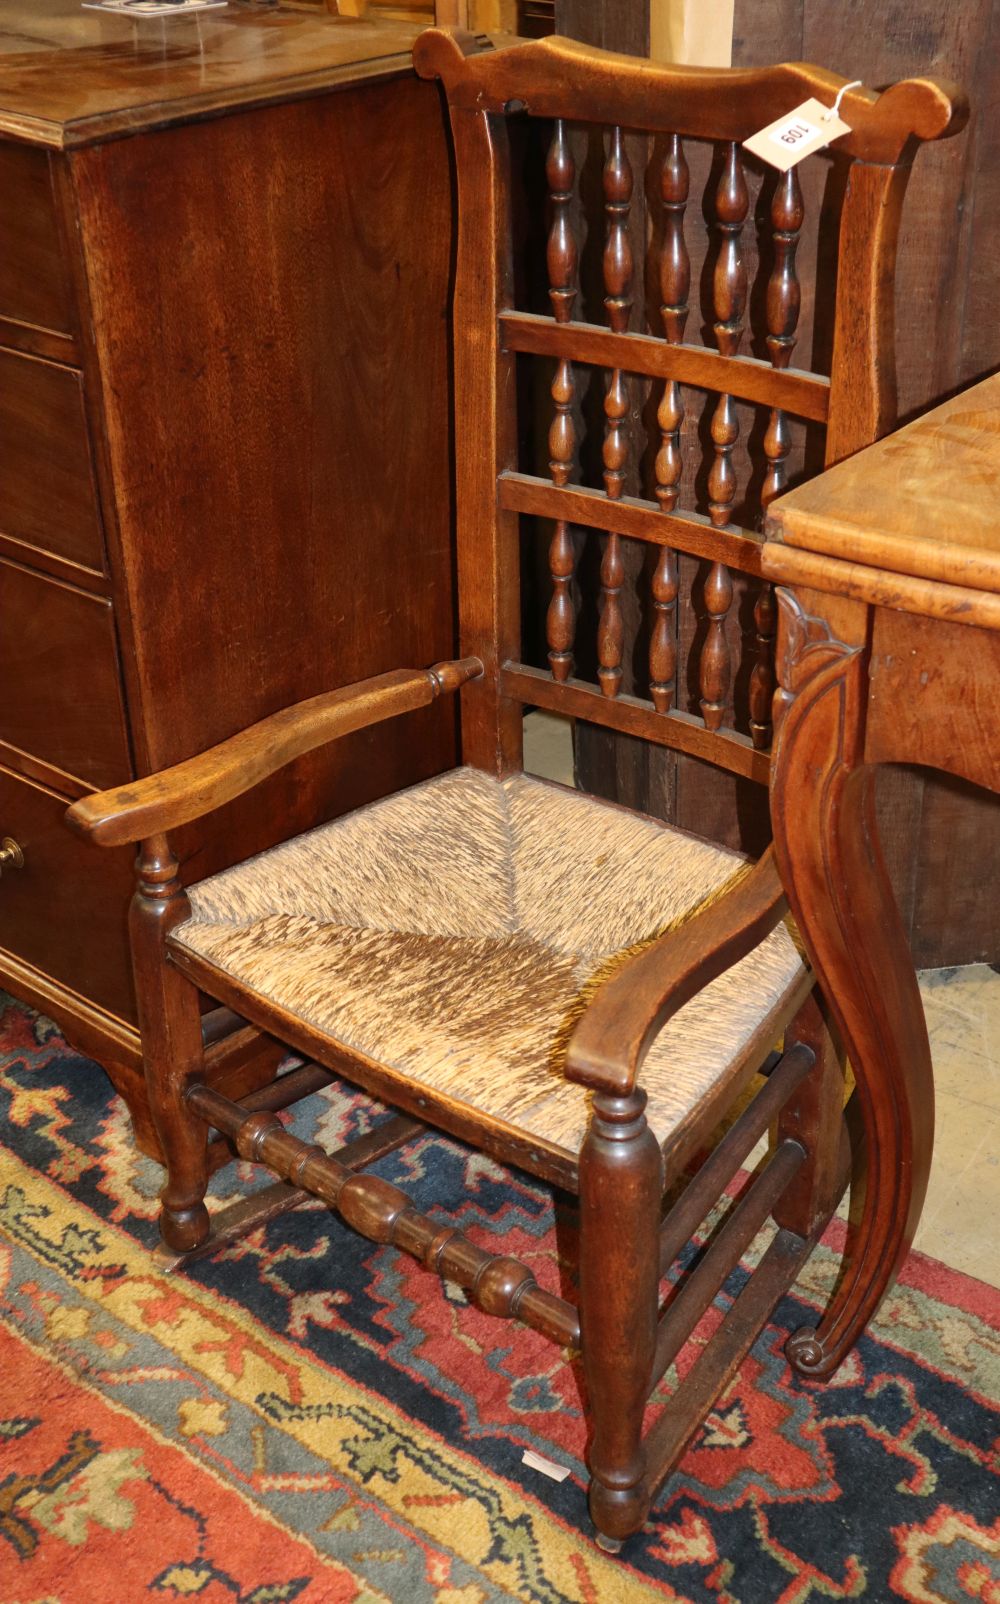 A 19th century Lancashire spindleback rocking chair with rush seat